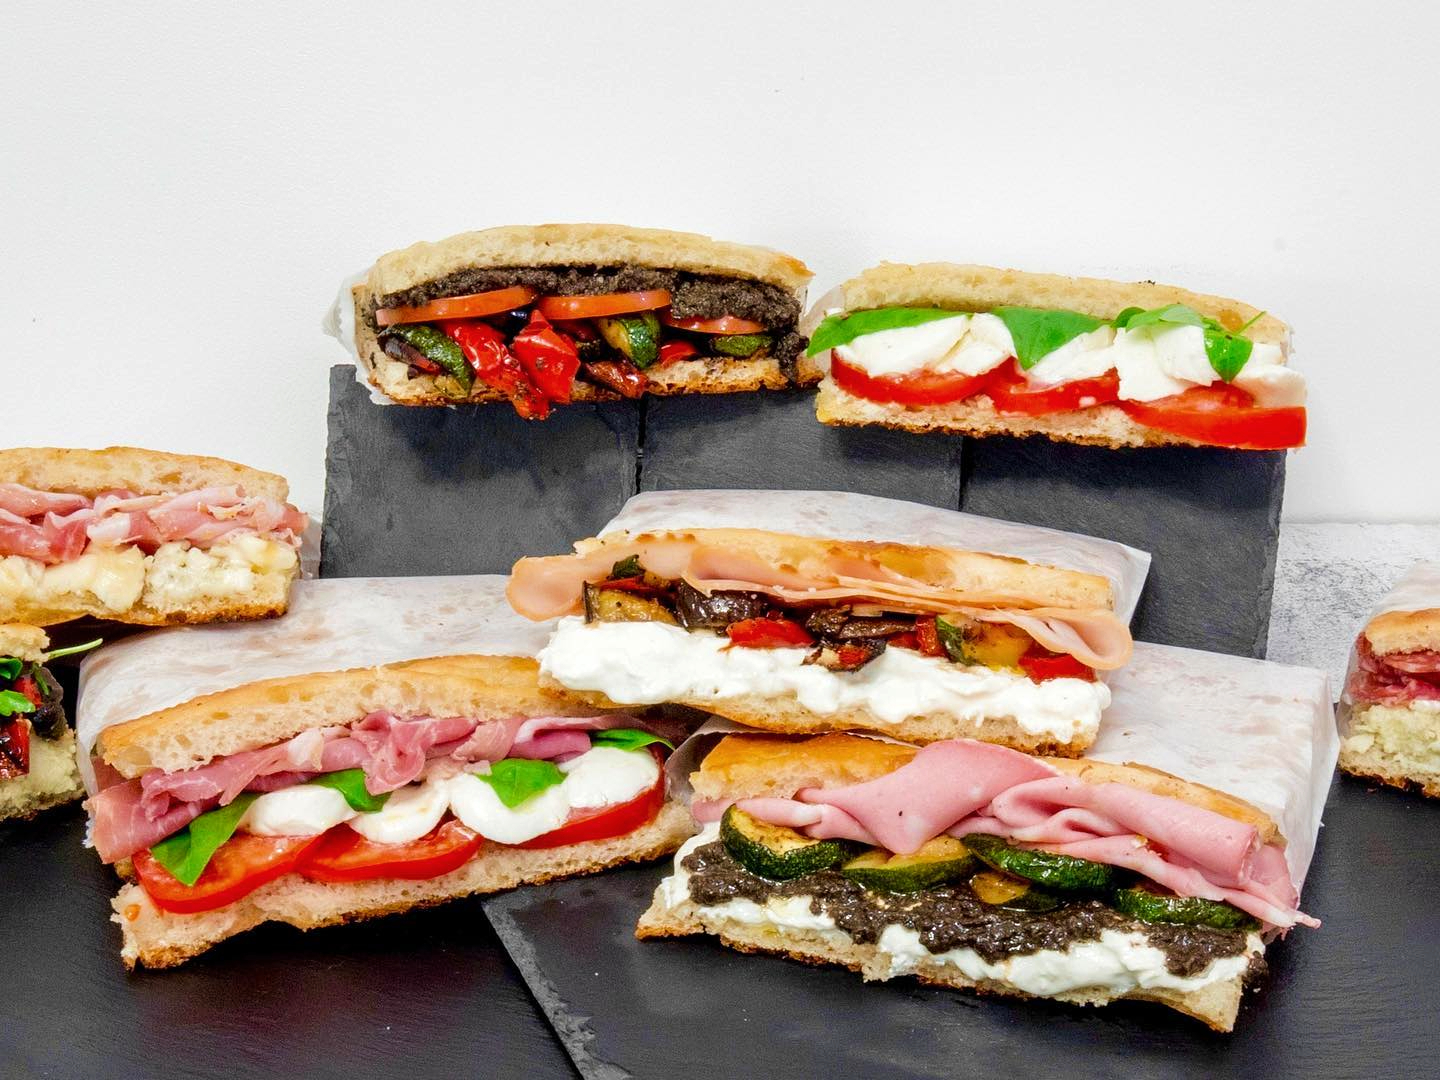 affordable eats sandwiches edition in london range of cheap sandwiches